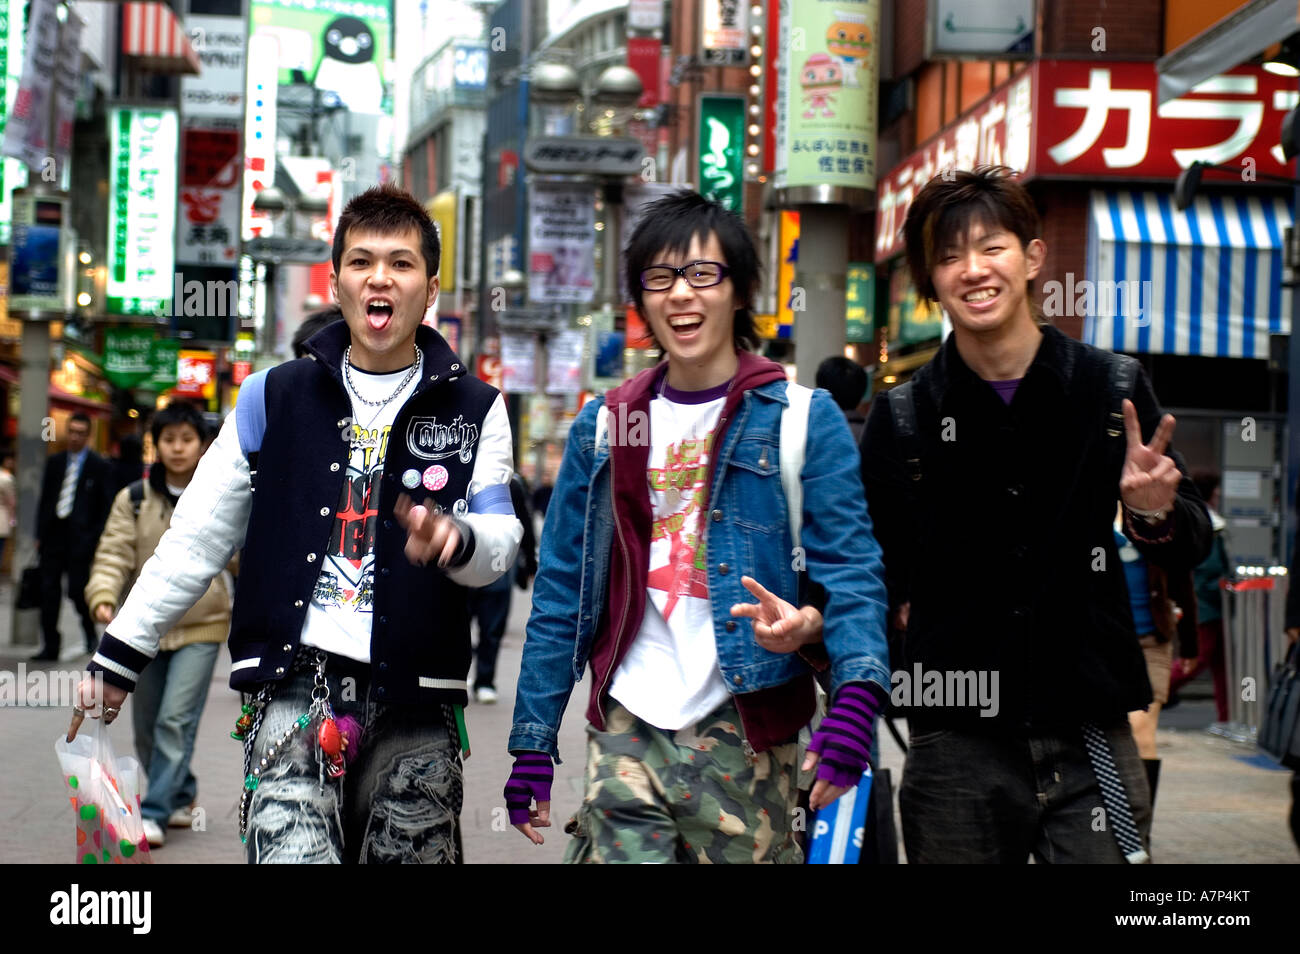 Tokyo Japan Shibuya Teen hipsters  cosu purei costume outfit expression  of youthful exuberance Stock Photo